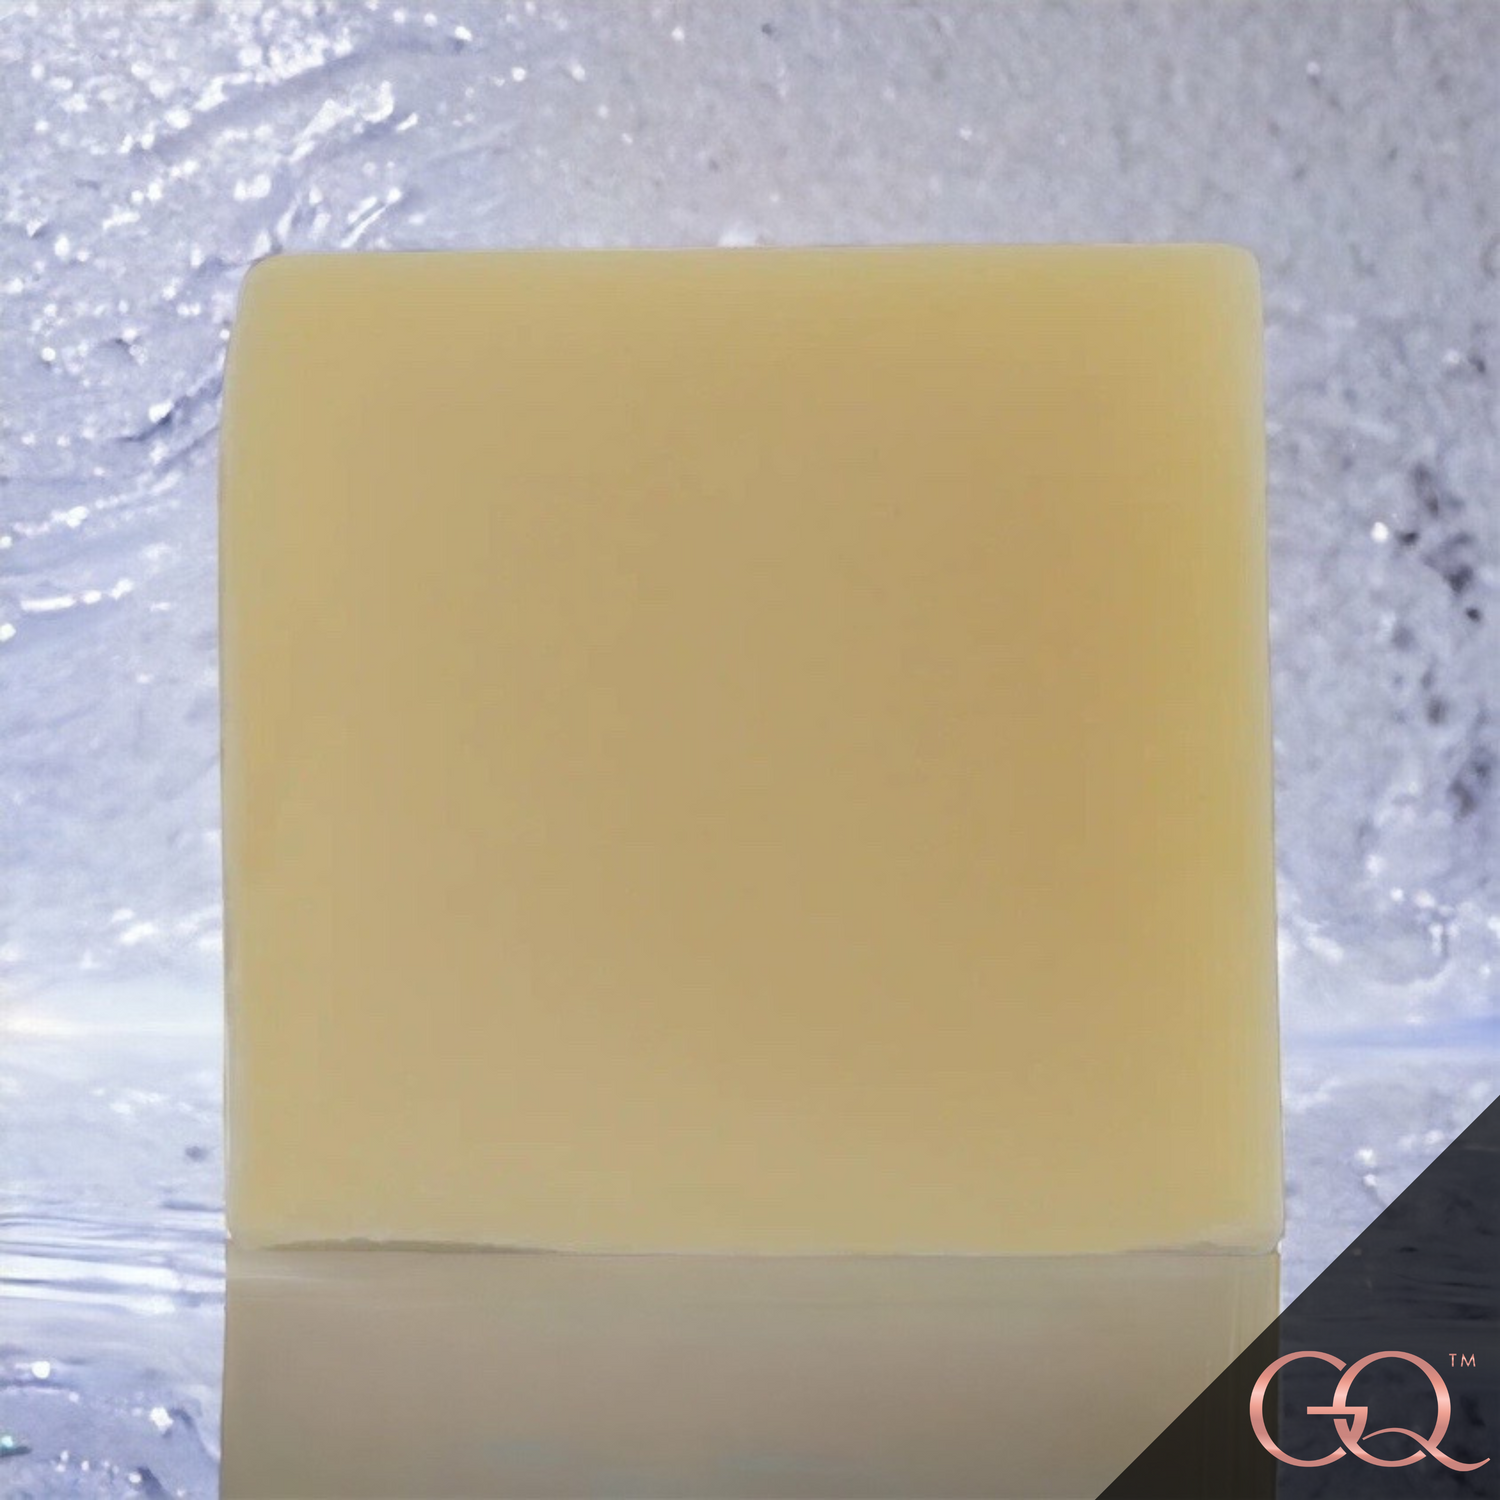 Natural Organic Coconutty Soap | GLOWNIQUE